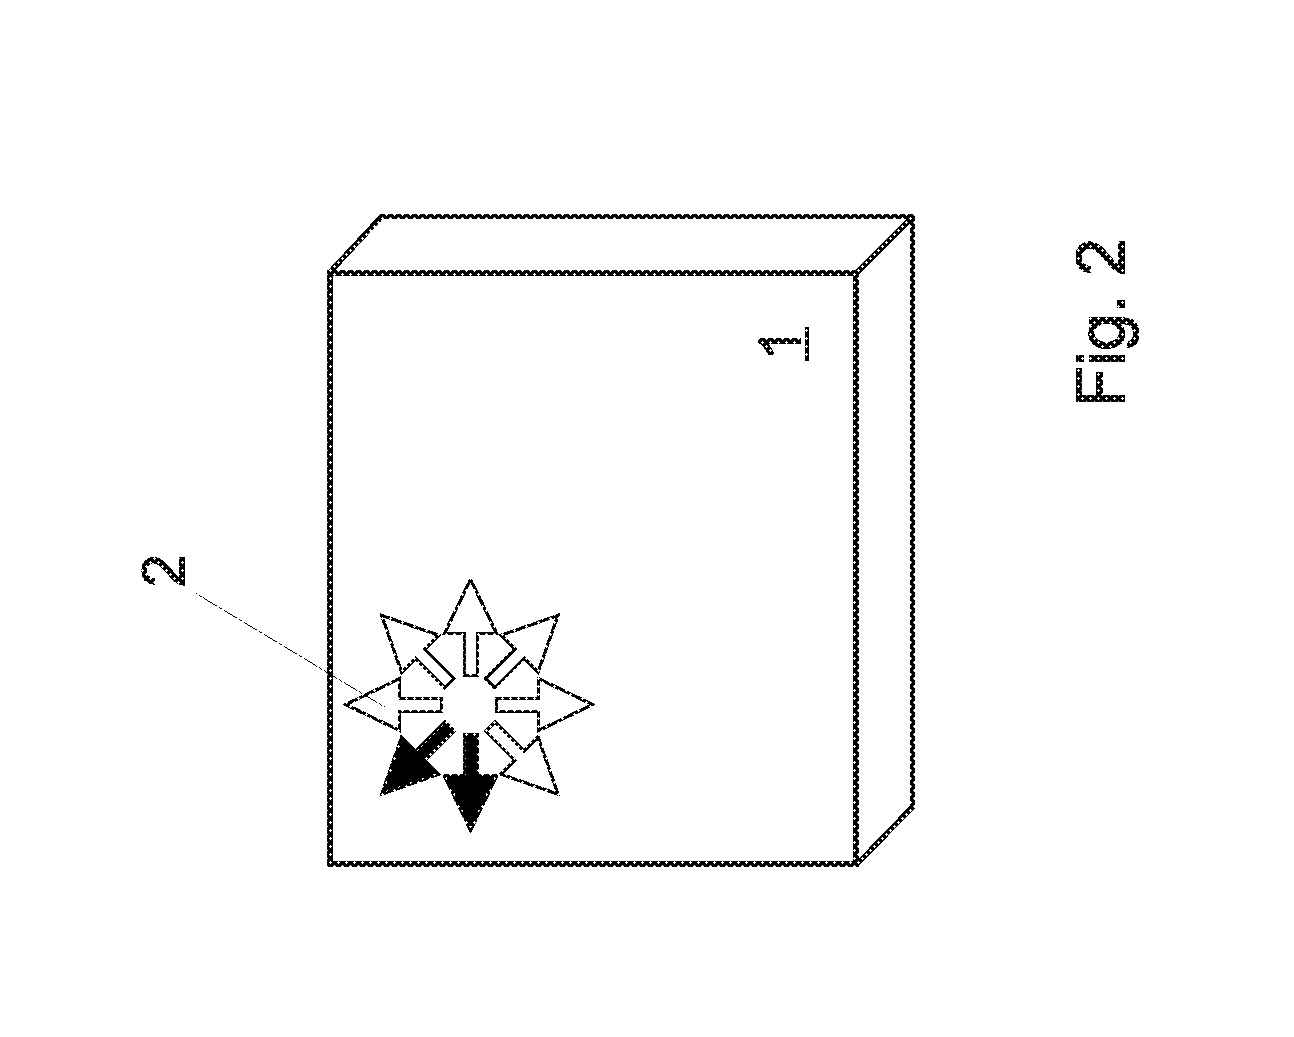 User-controlled method and system for modifying the radiation of a wireless device in one or more user-selected volumes